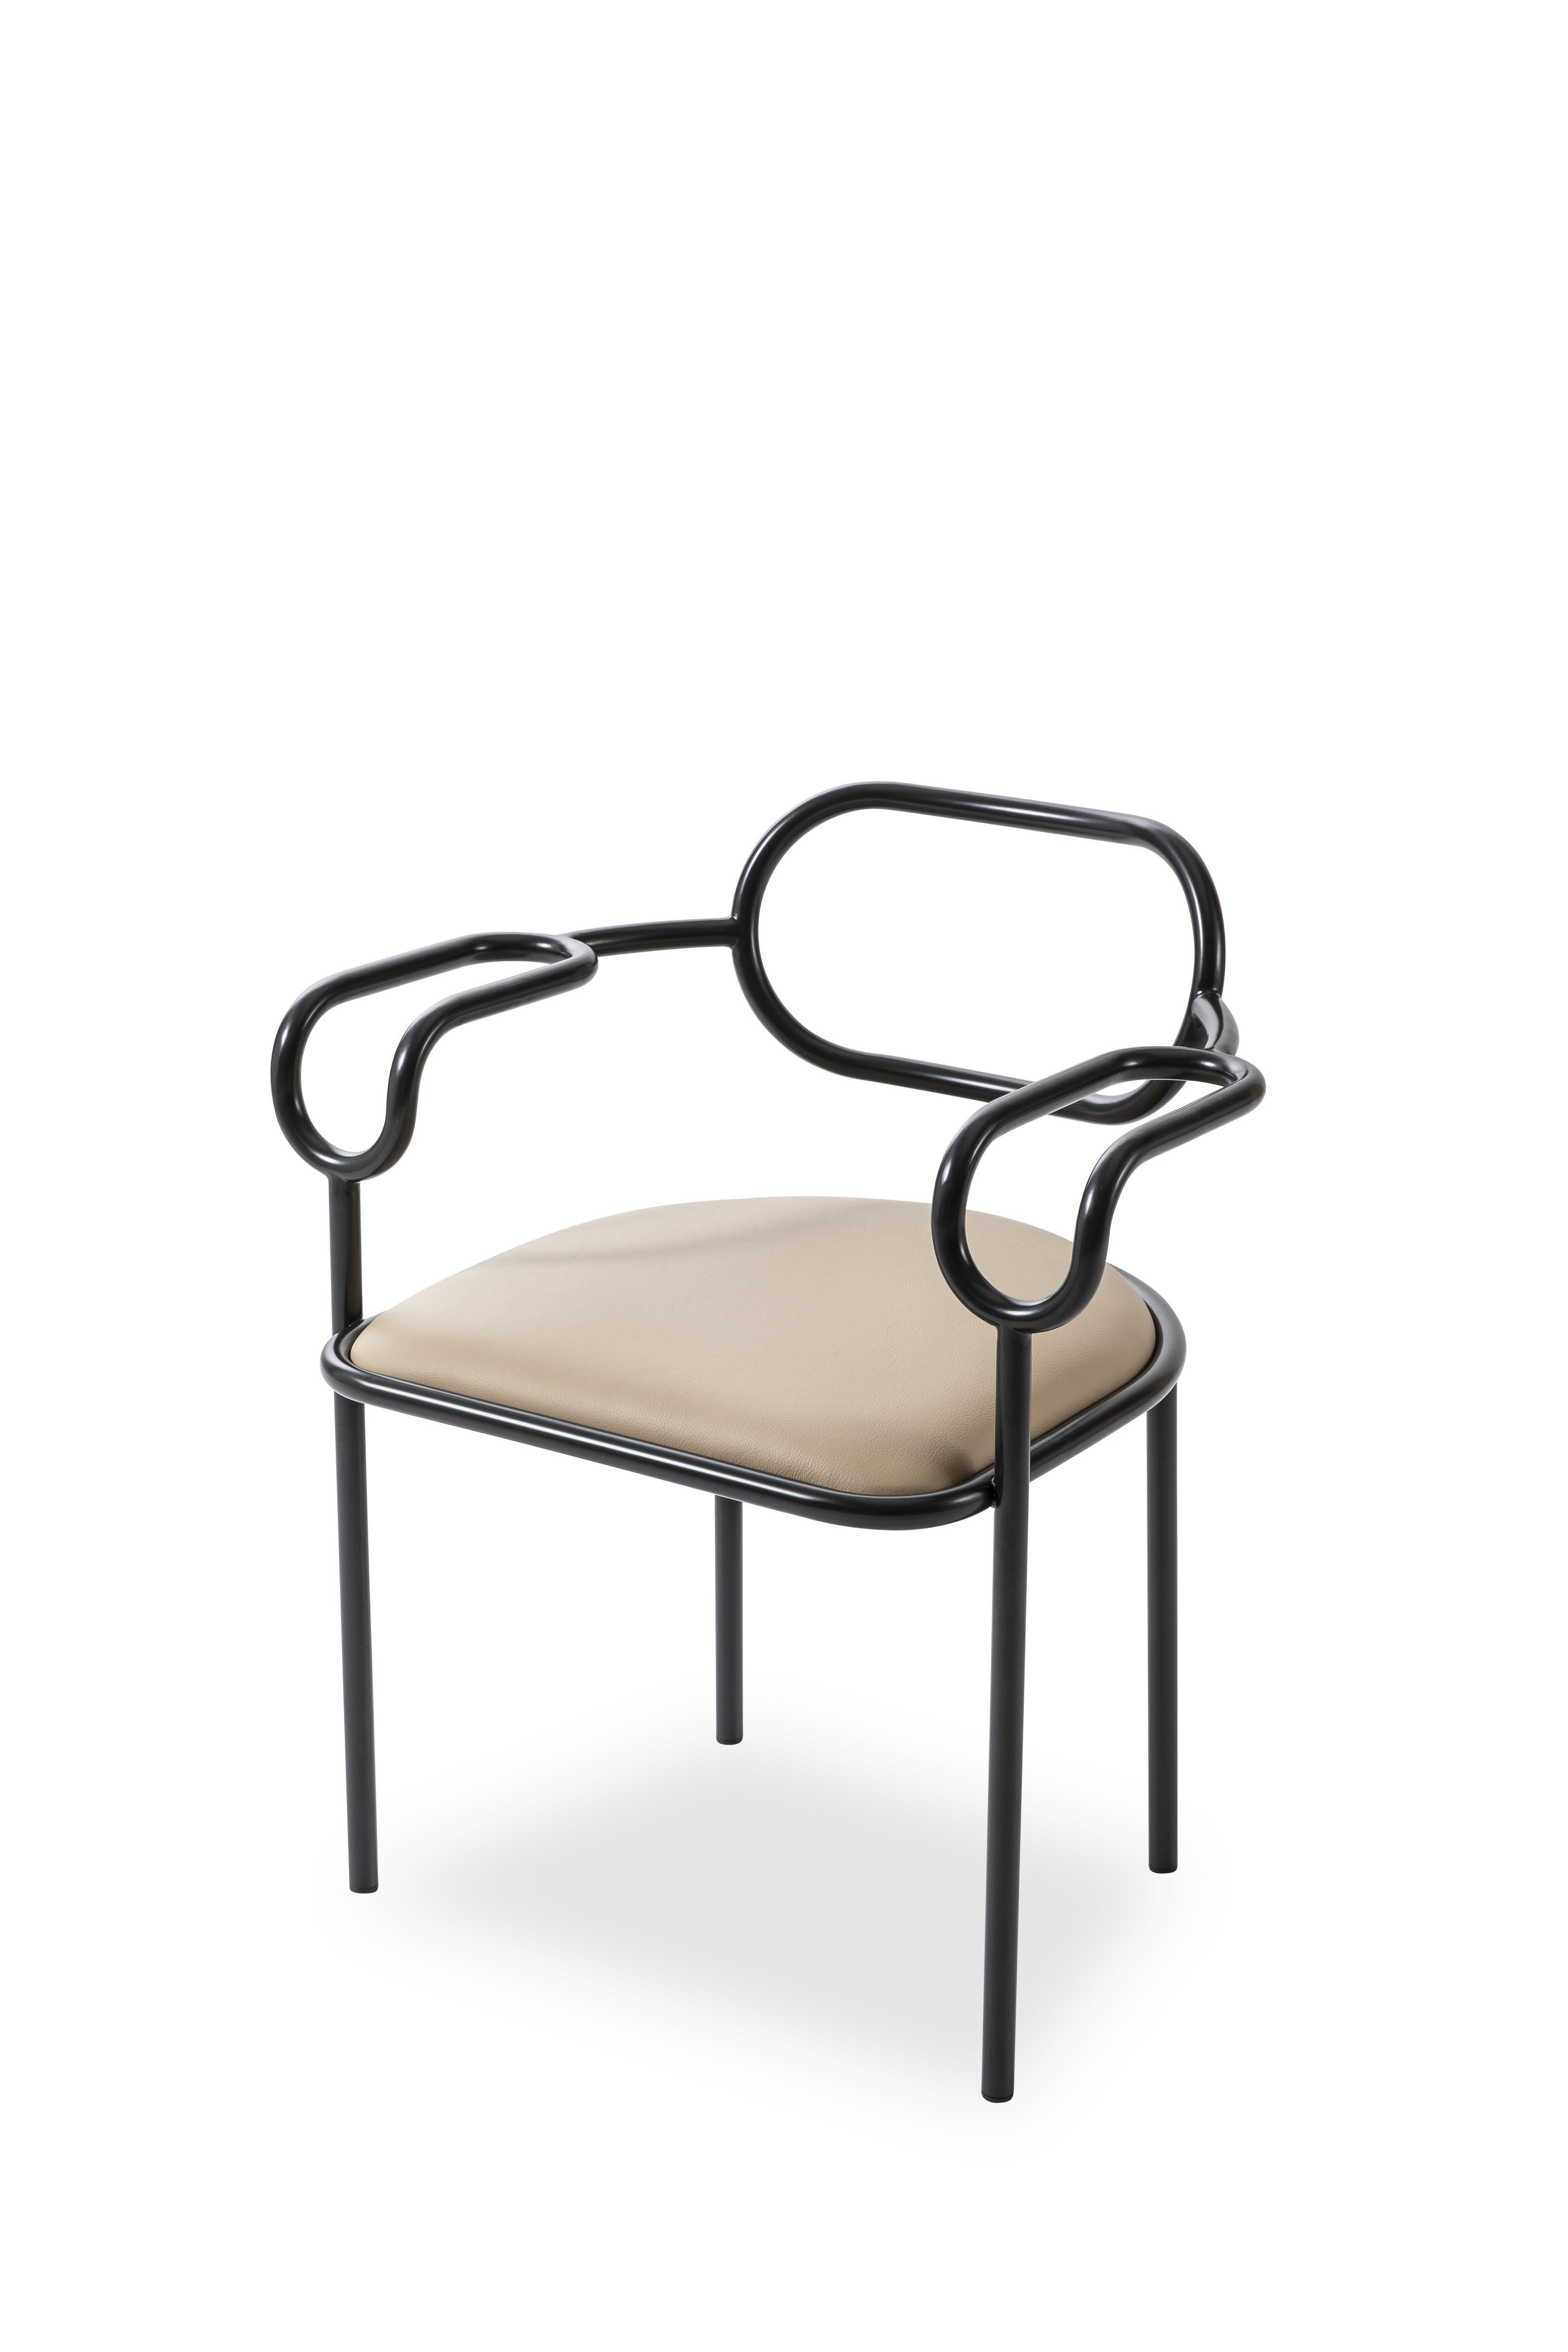 Created as a tribute to the 1980s, the decade during which the original design was made and when Shiro Kuramata began his fertile collaboration with Cappellini, sedia 01 chair features an ultralight volume and is characterized by the sinuous